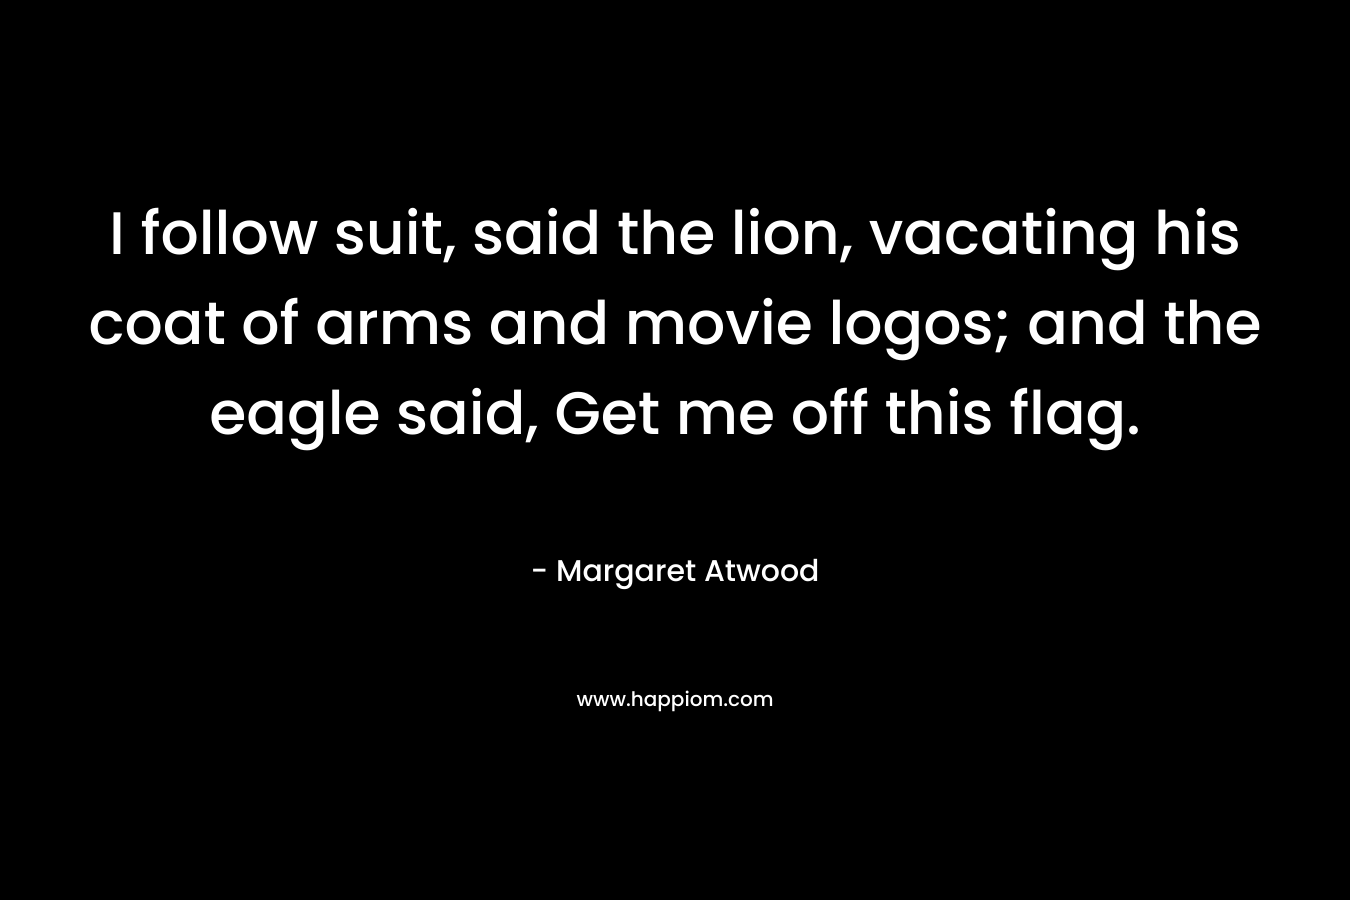 I follow suit, said the lion, vacating his coat of arms and movie logos; and the eagle said, Get me off this flag. – Margaret Atwood